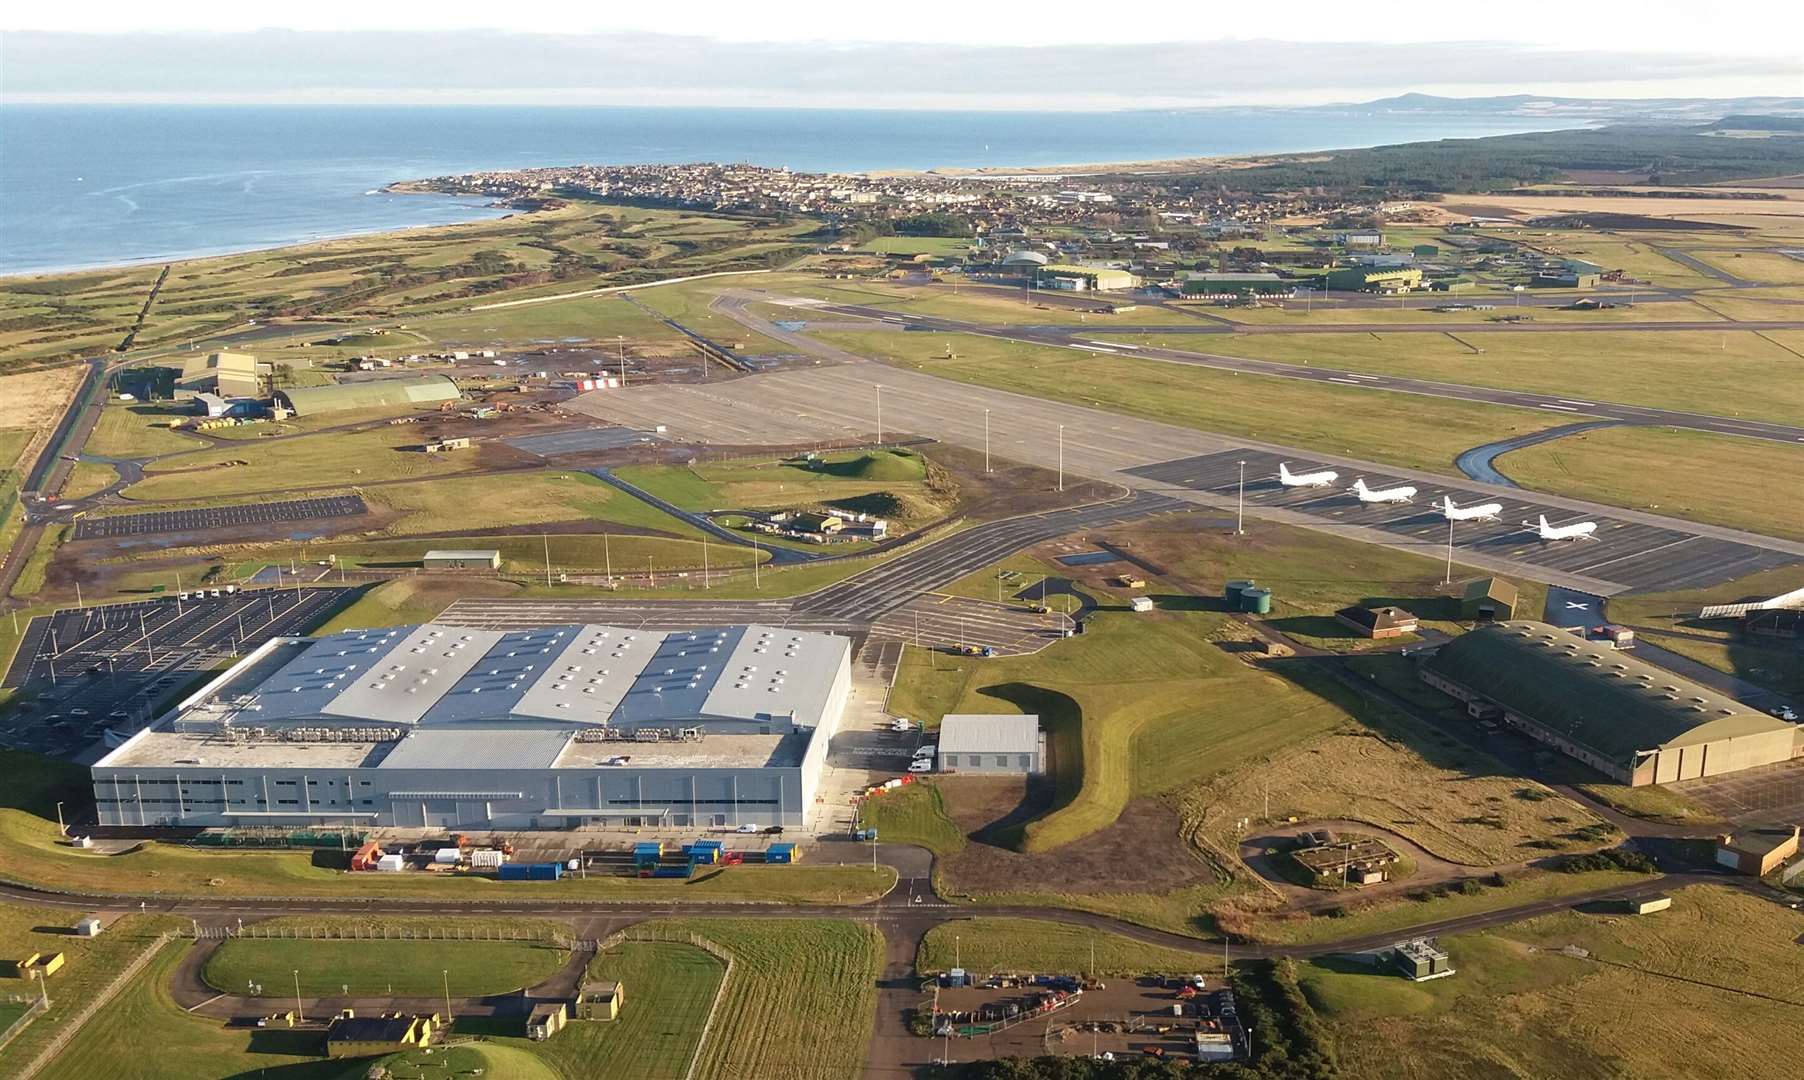 A small number of Covid-19 cases have been identified at RAF Lossiemouth.